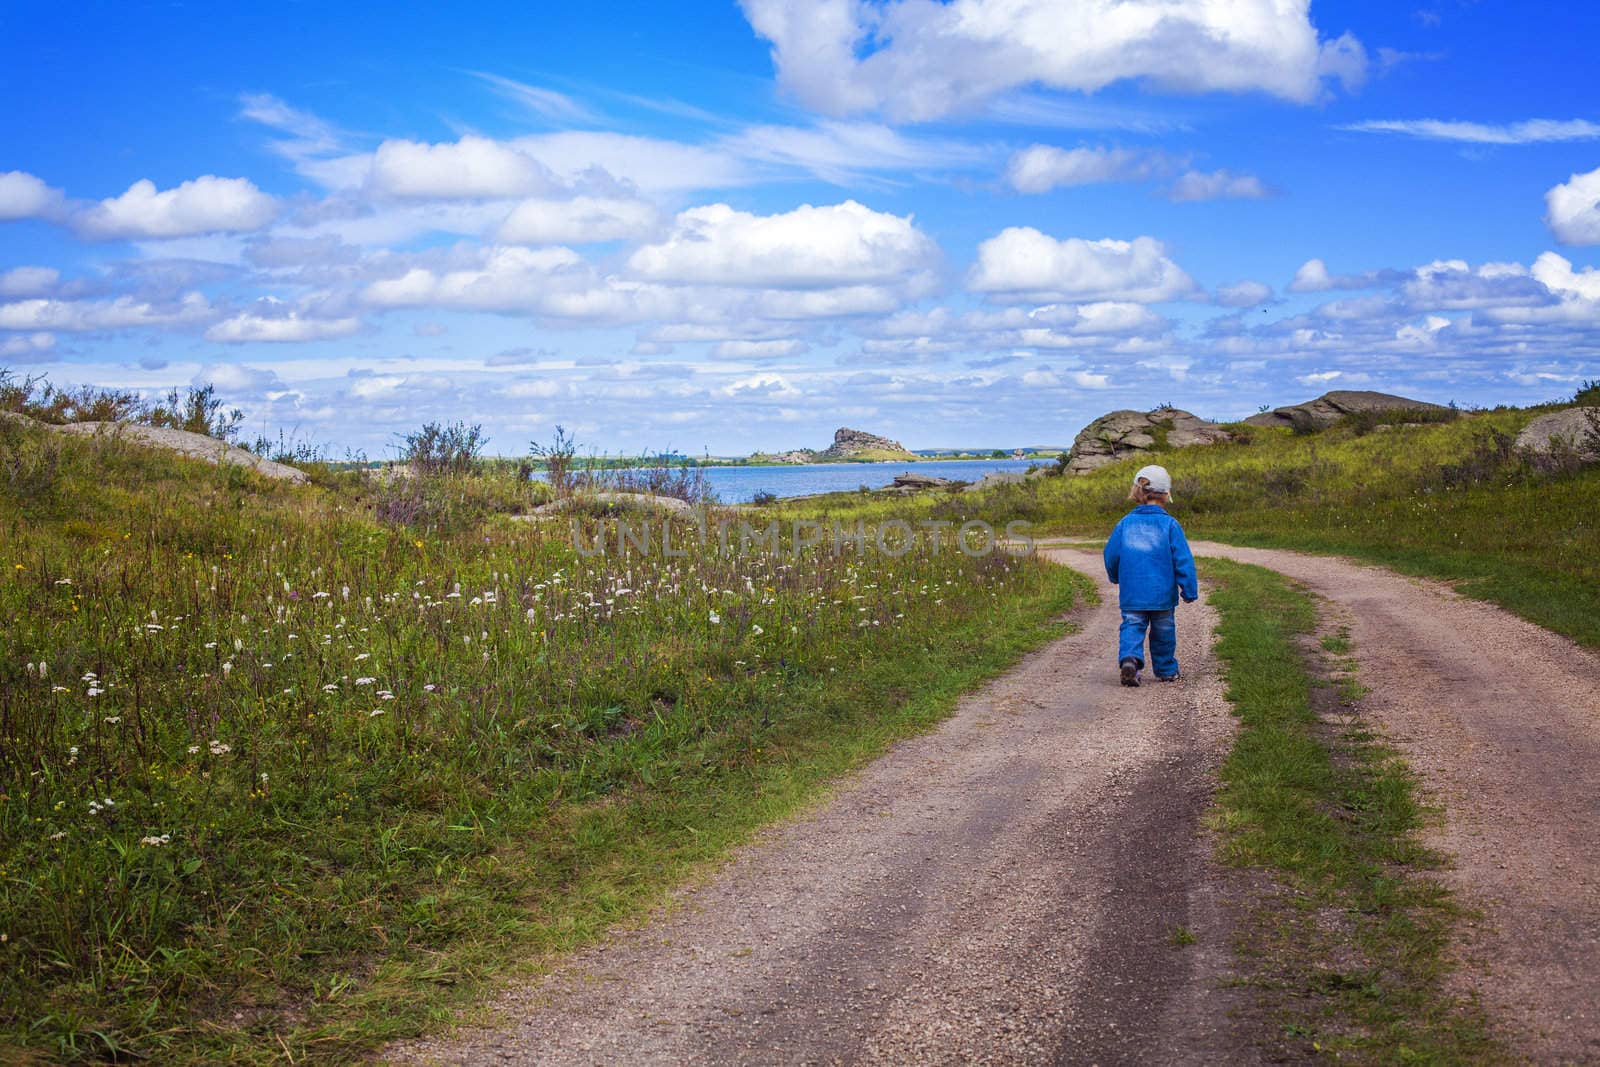  boy walking country road by anelina